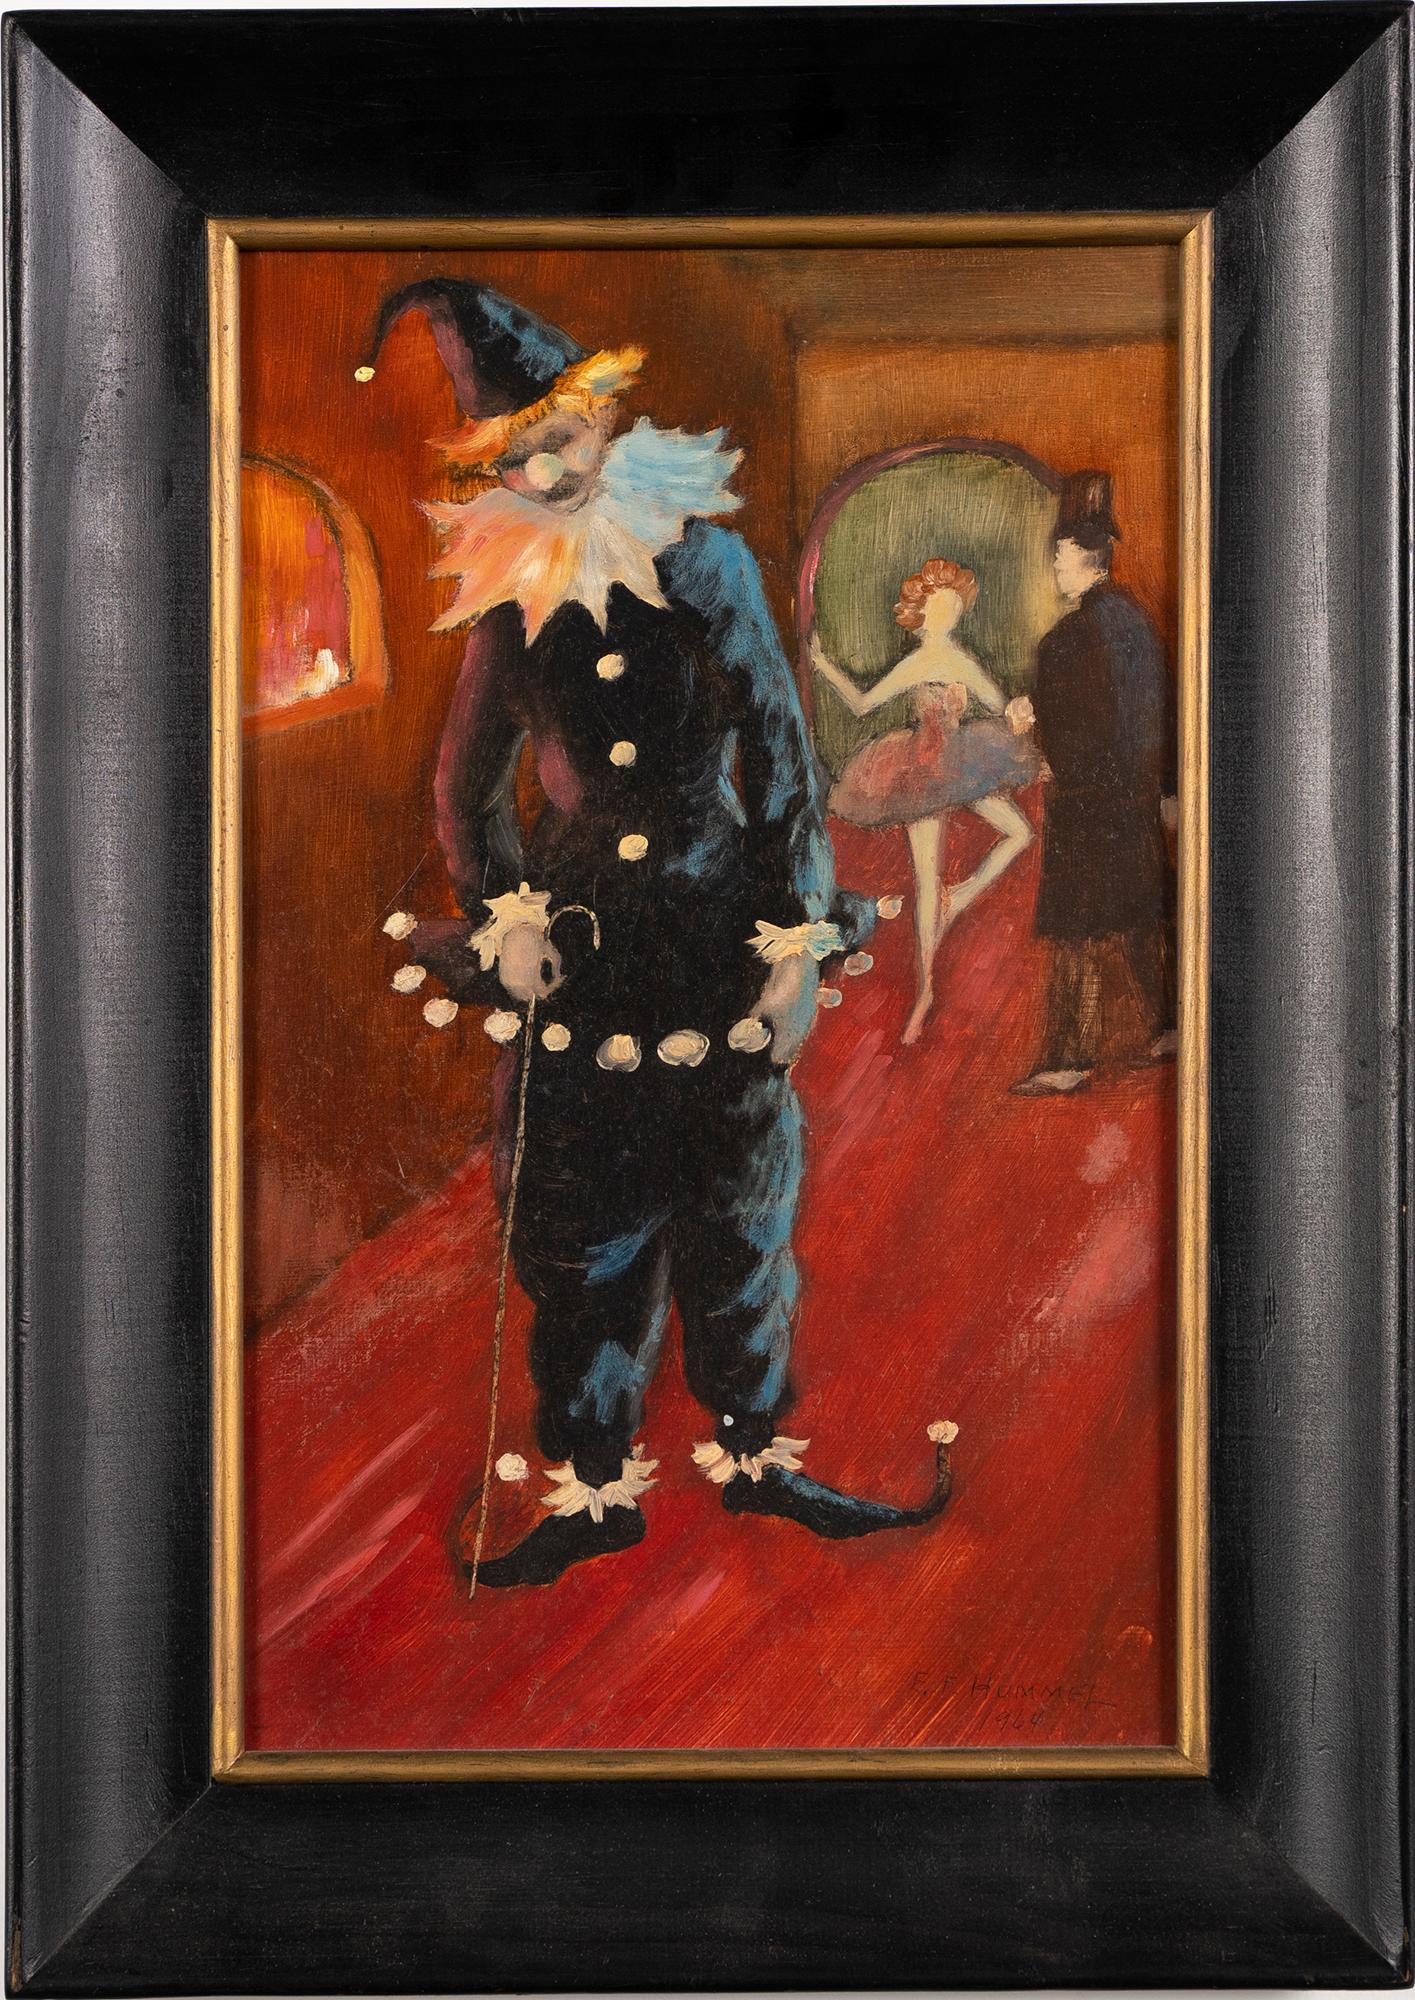 Vintage Clown Comedy "The Loser" Genre Scene Interior Signed Oil Painting 